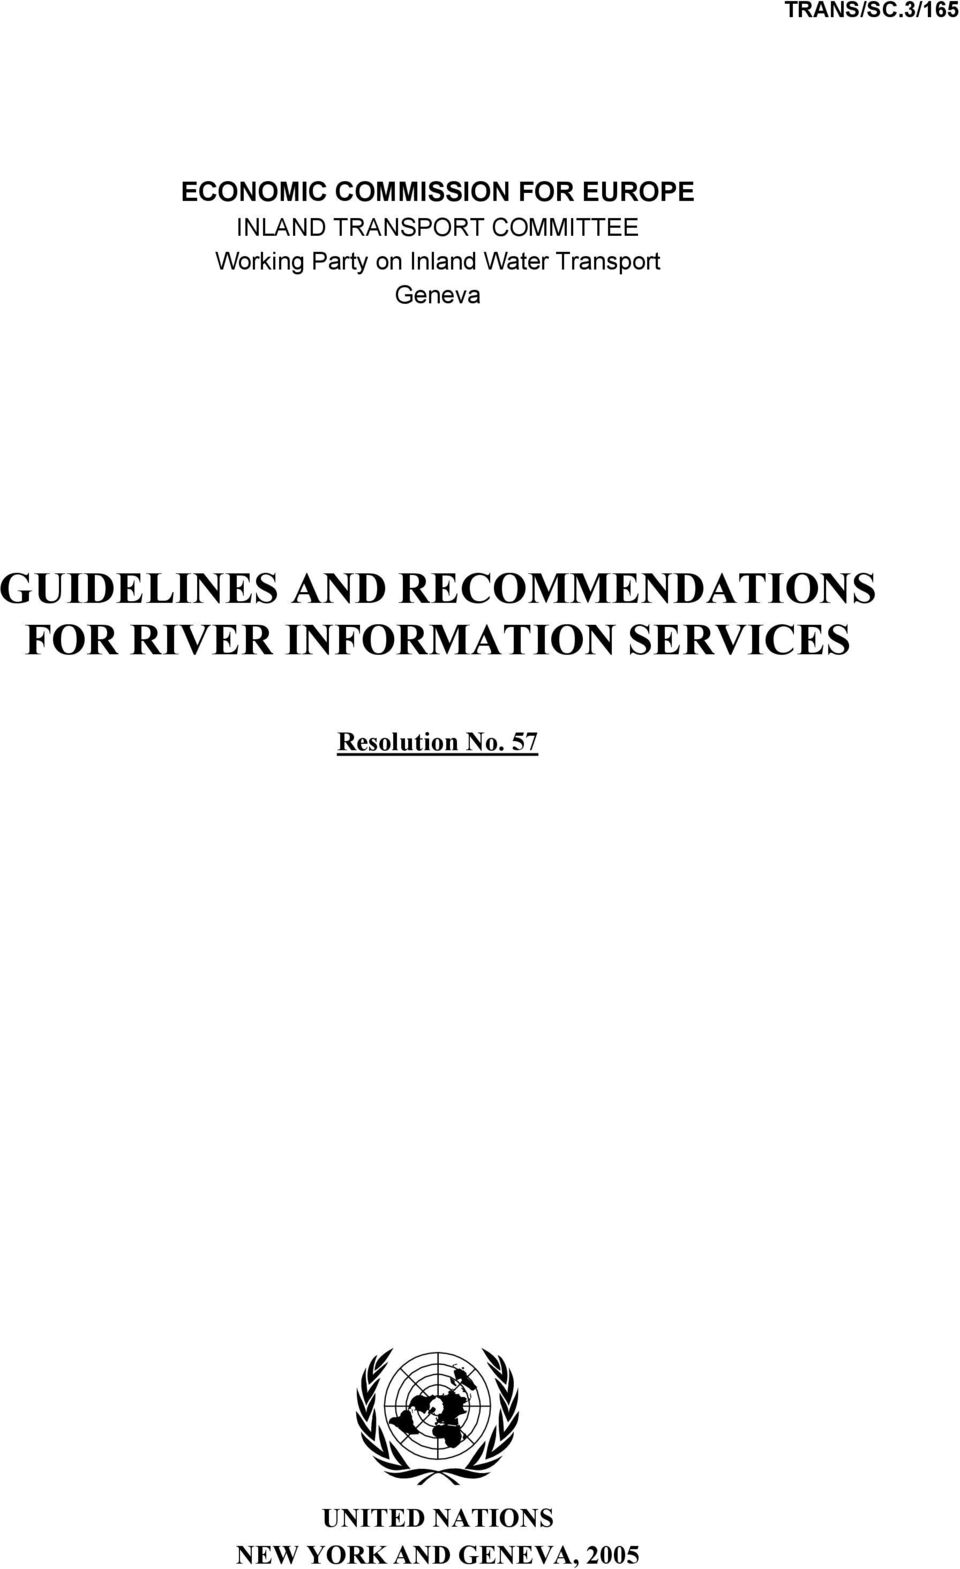 GUIDELINES AND RECOMMENDATIONS FOR RIVER INFORMATION